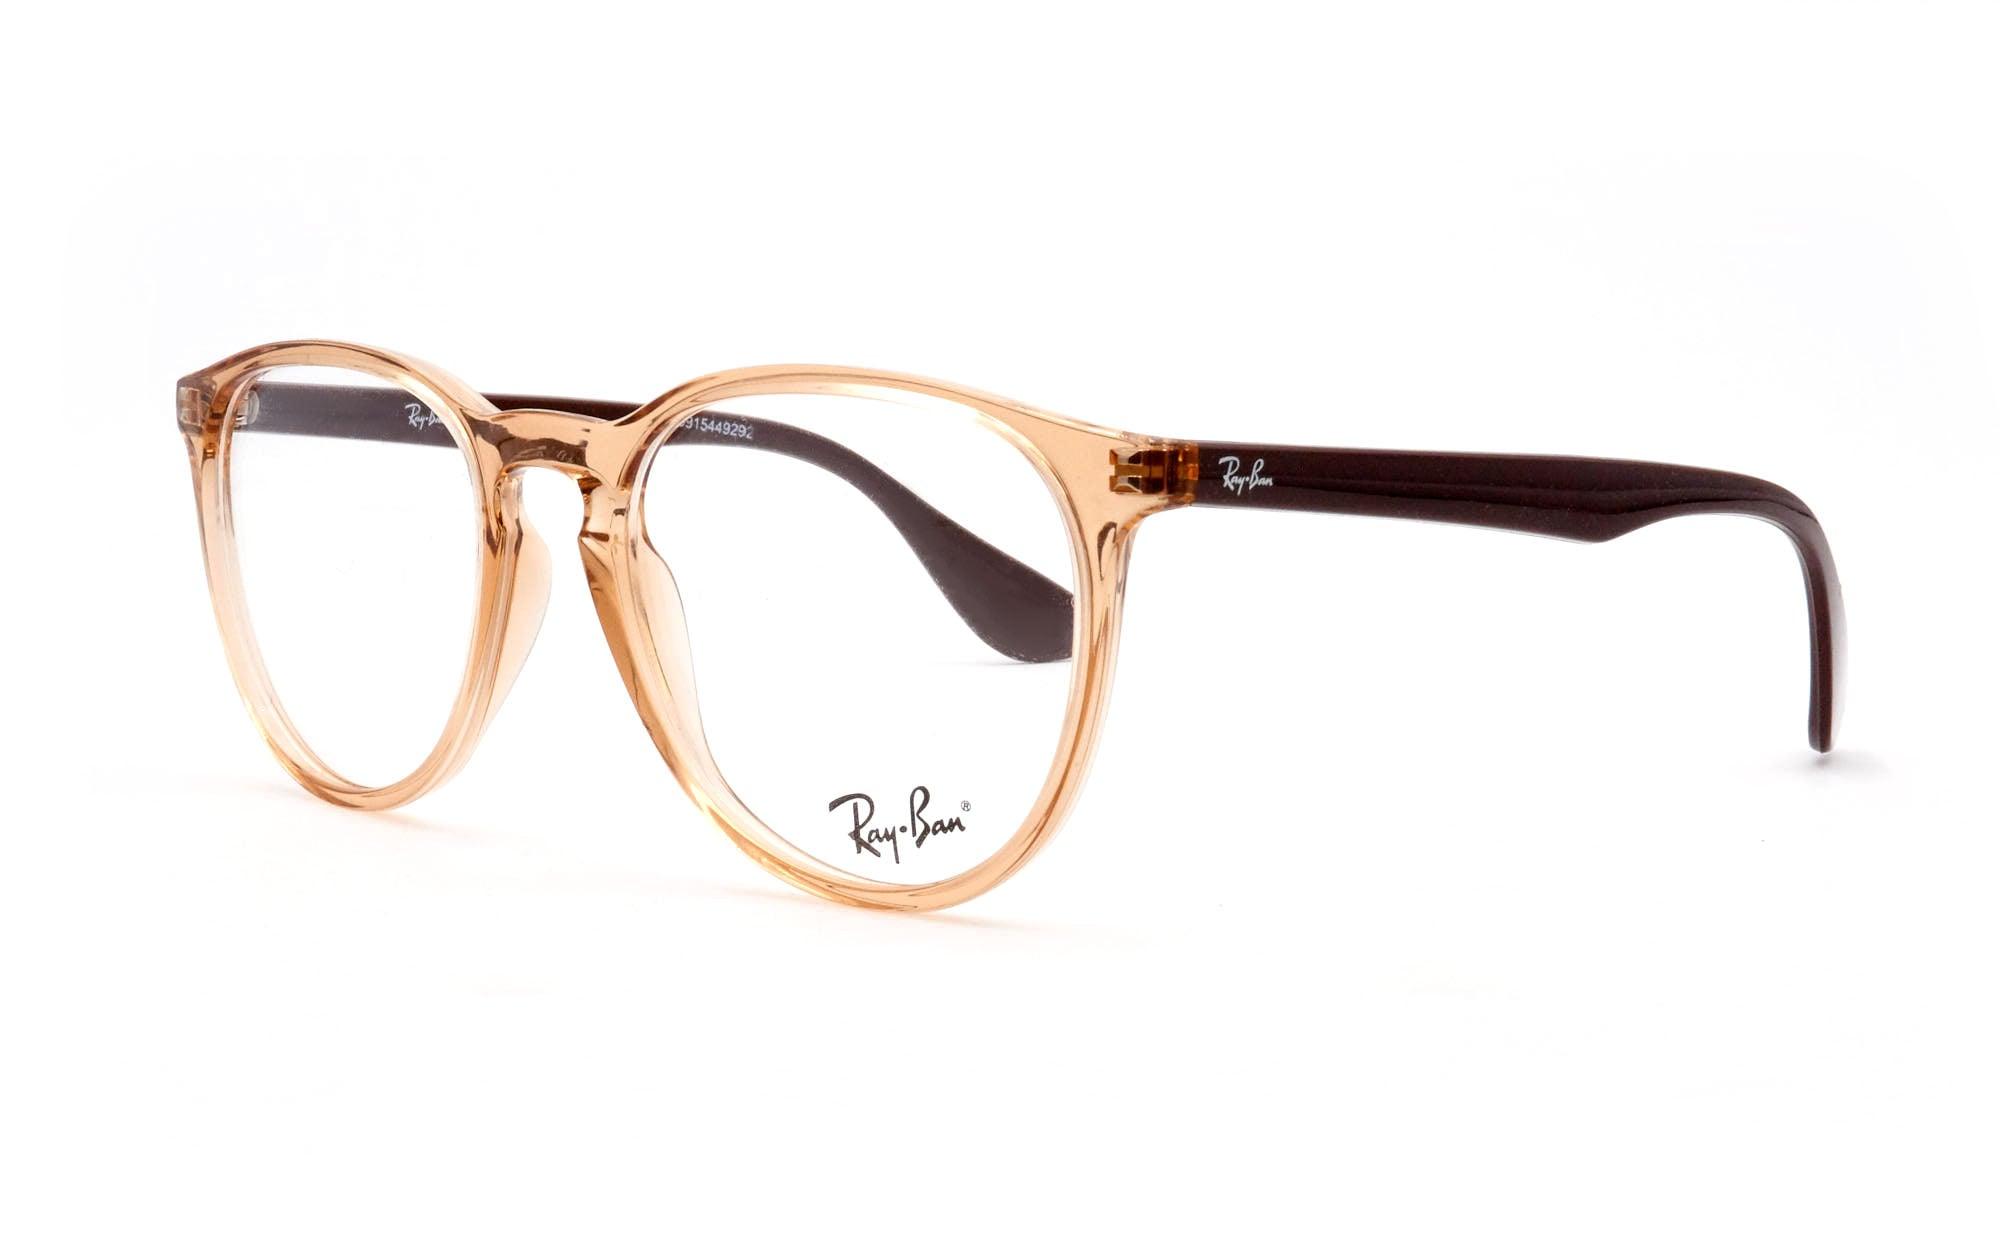 ray-ban 7046 51 5940 - Opticas Lookout